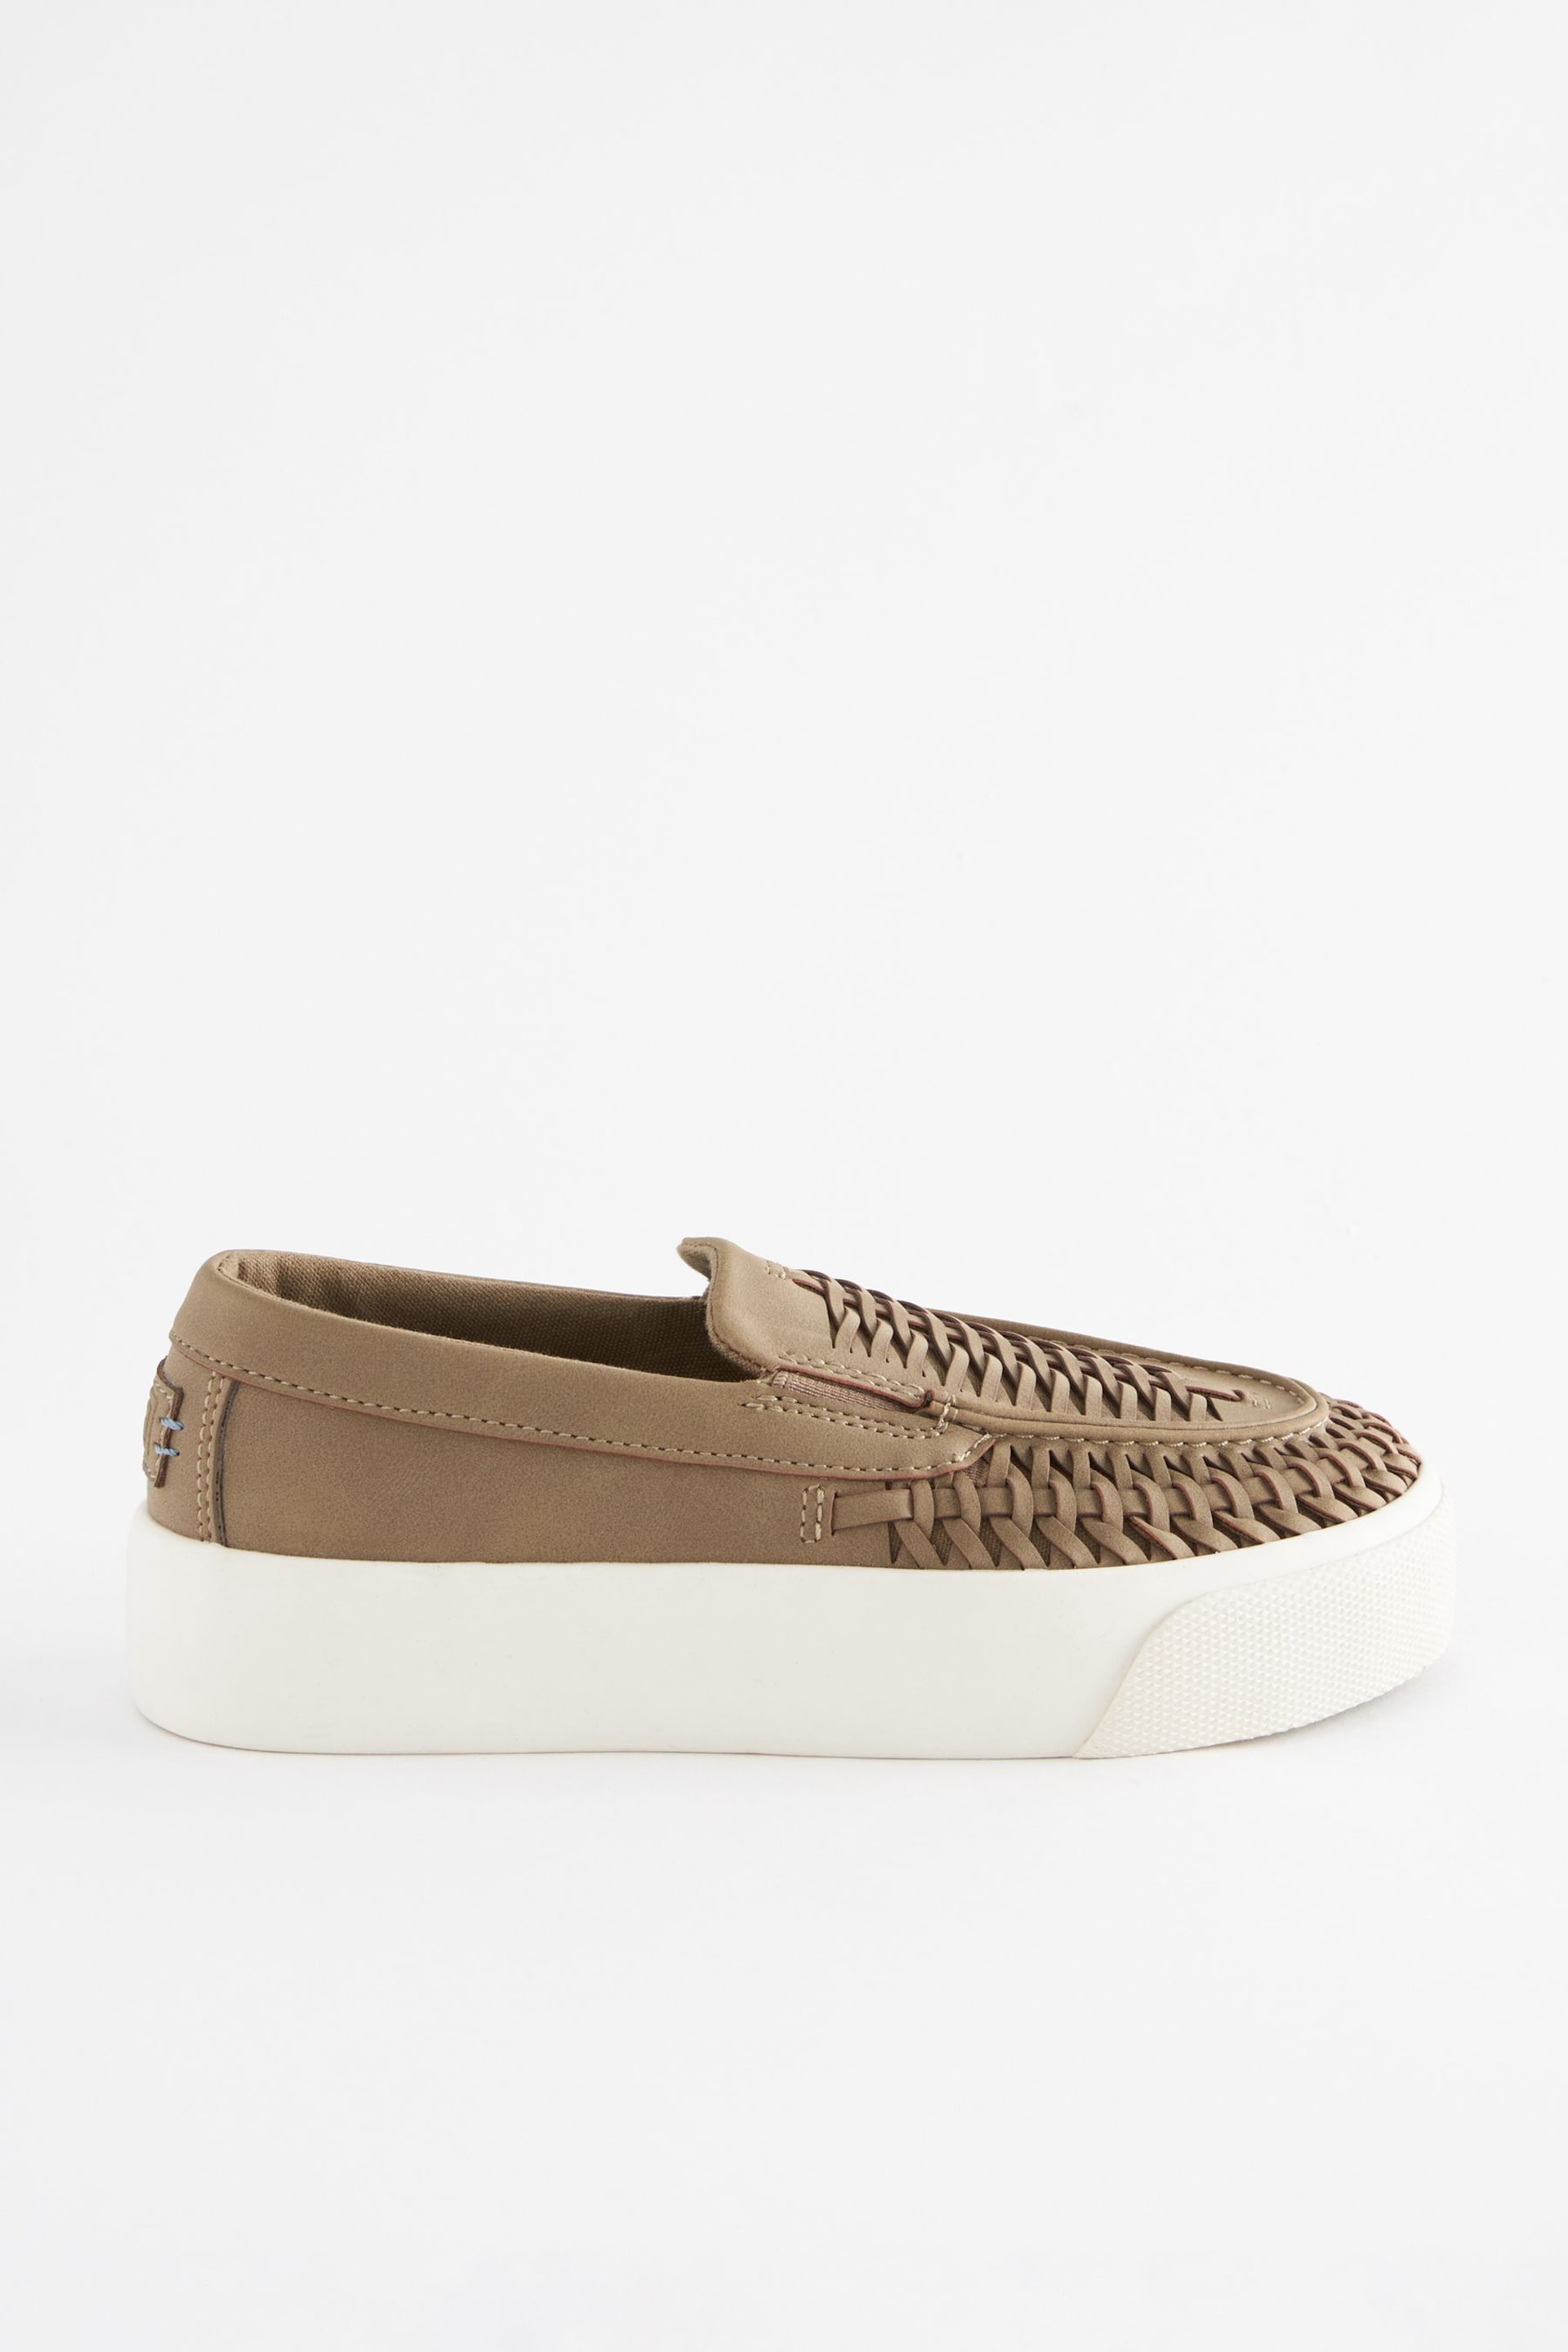 Neutral Woven Loafers - Image 2 of 6